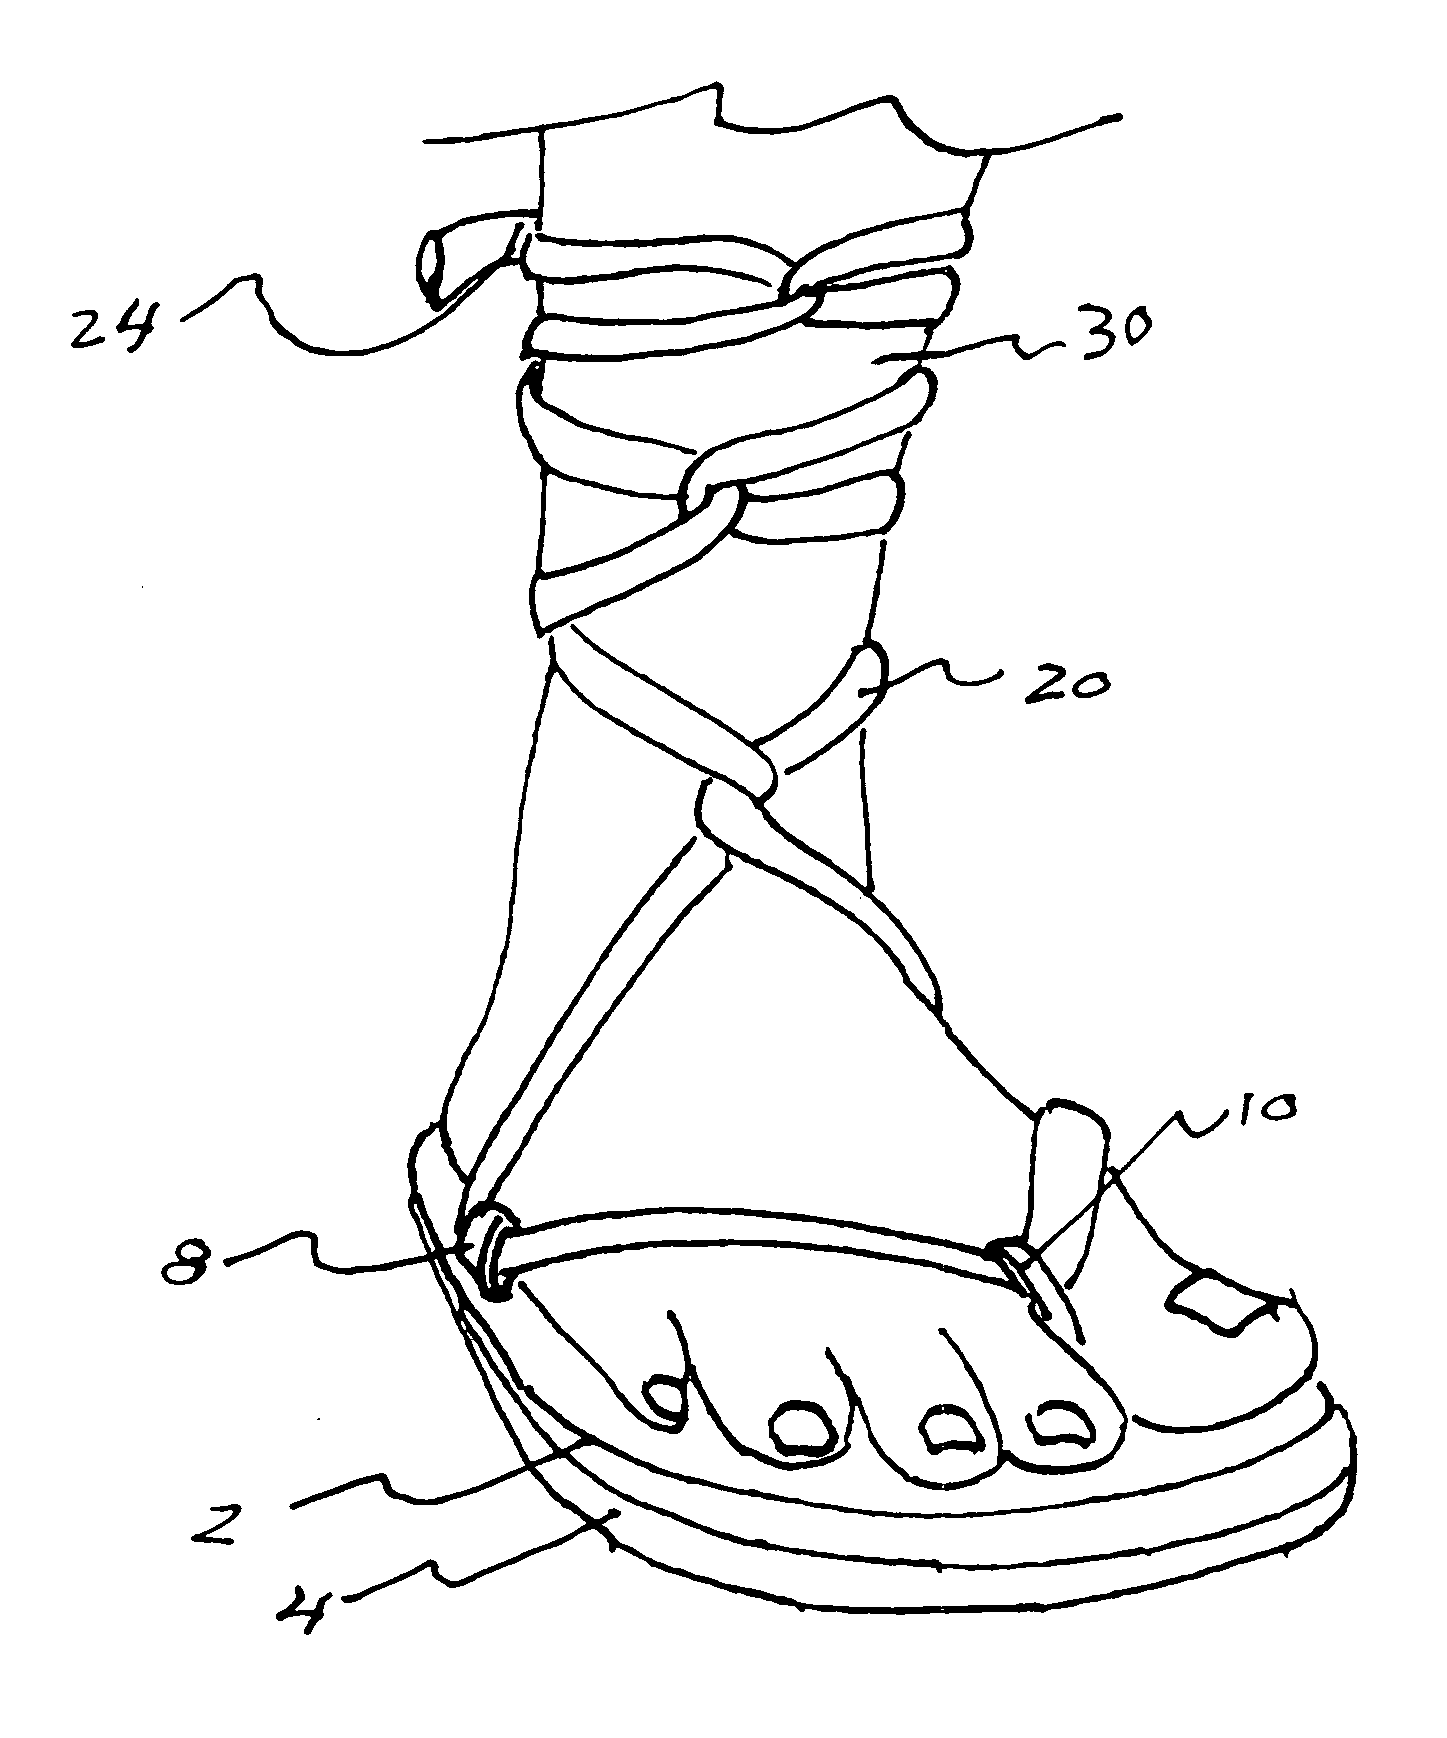 Sandal and strap assembly